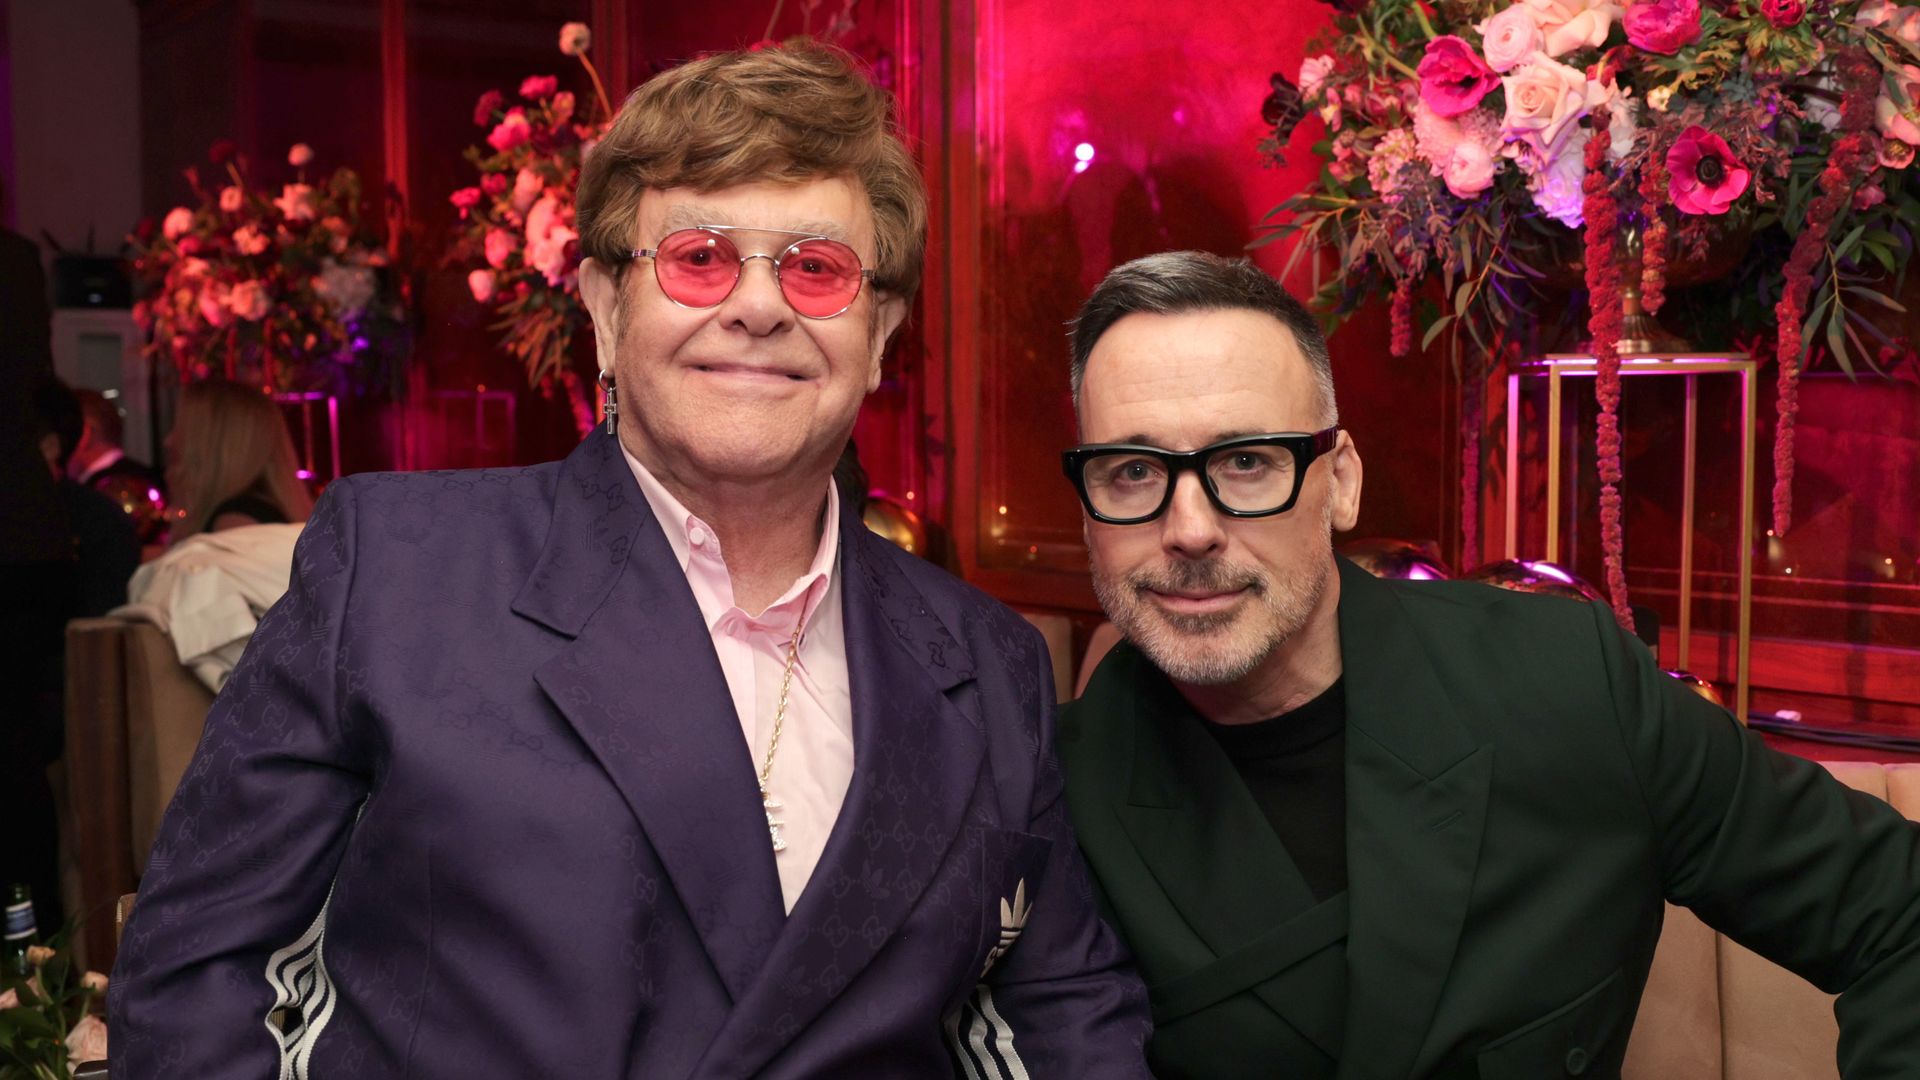 Elton John and David Furnish sit on couch at Oscars Party